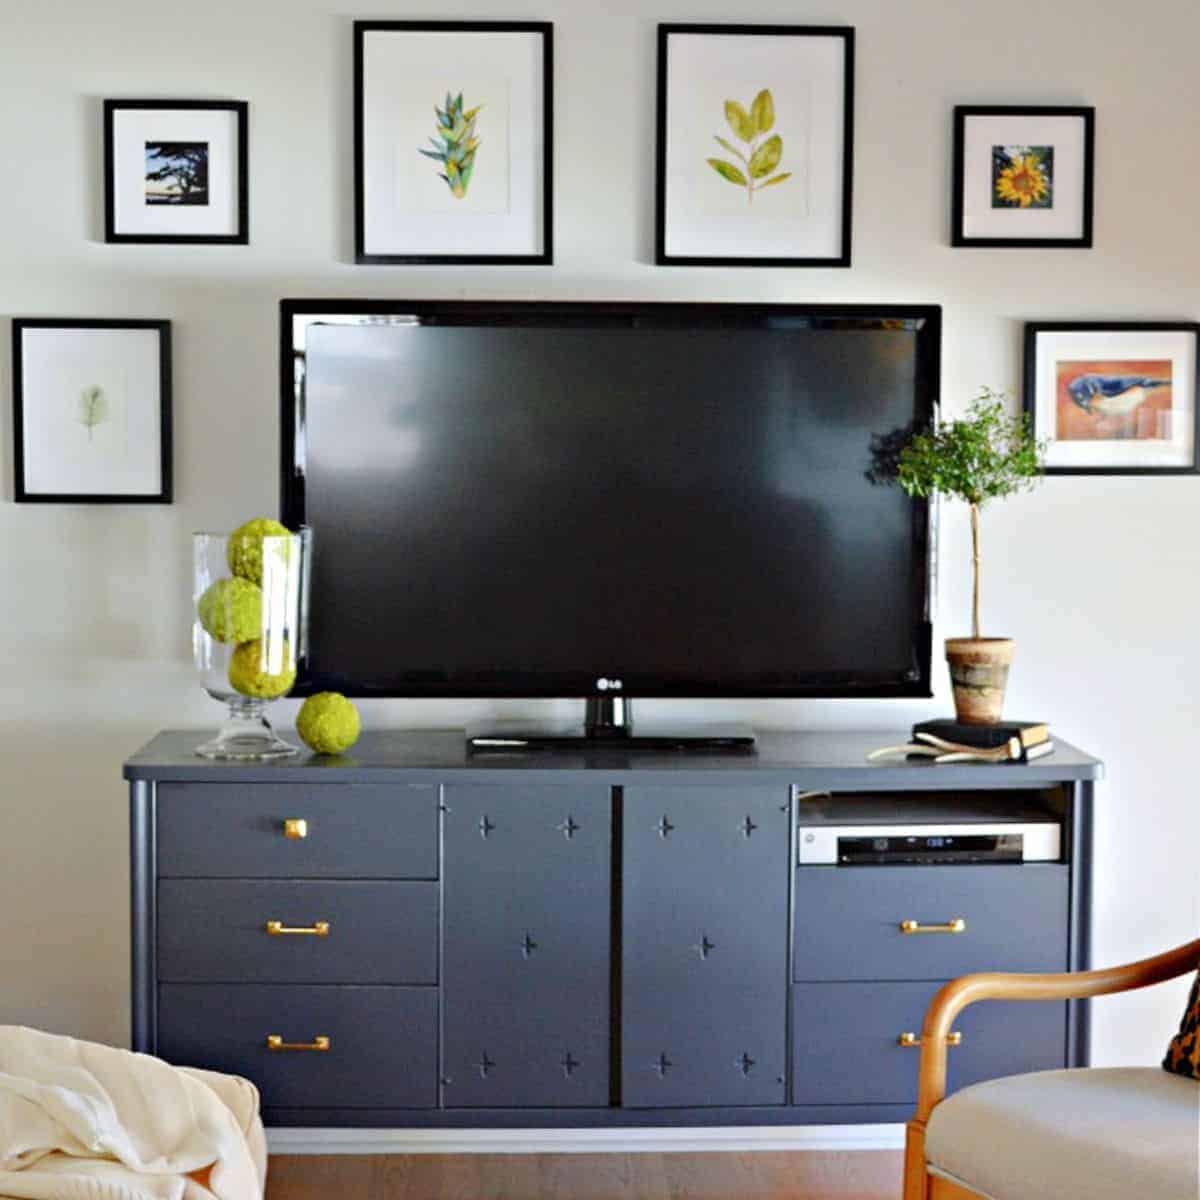 How to Decorate Around a Flat Screen TV